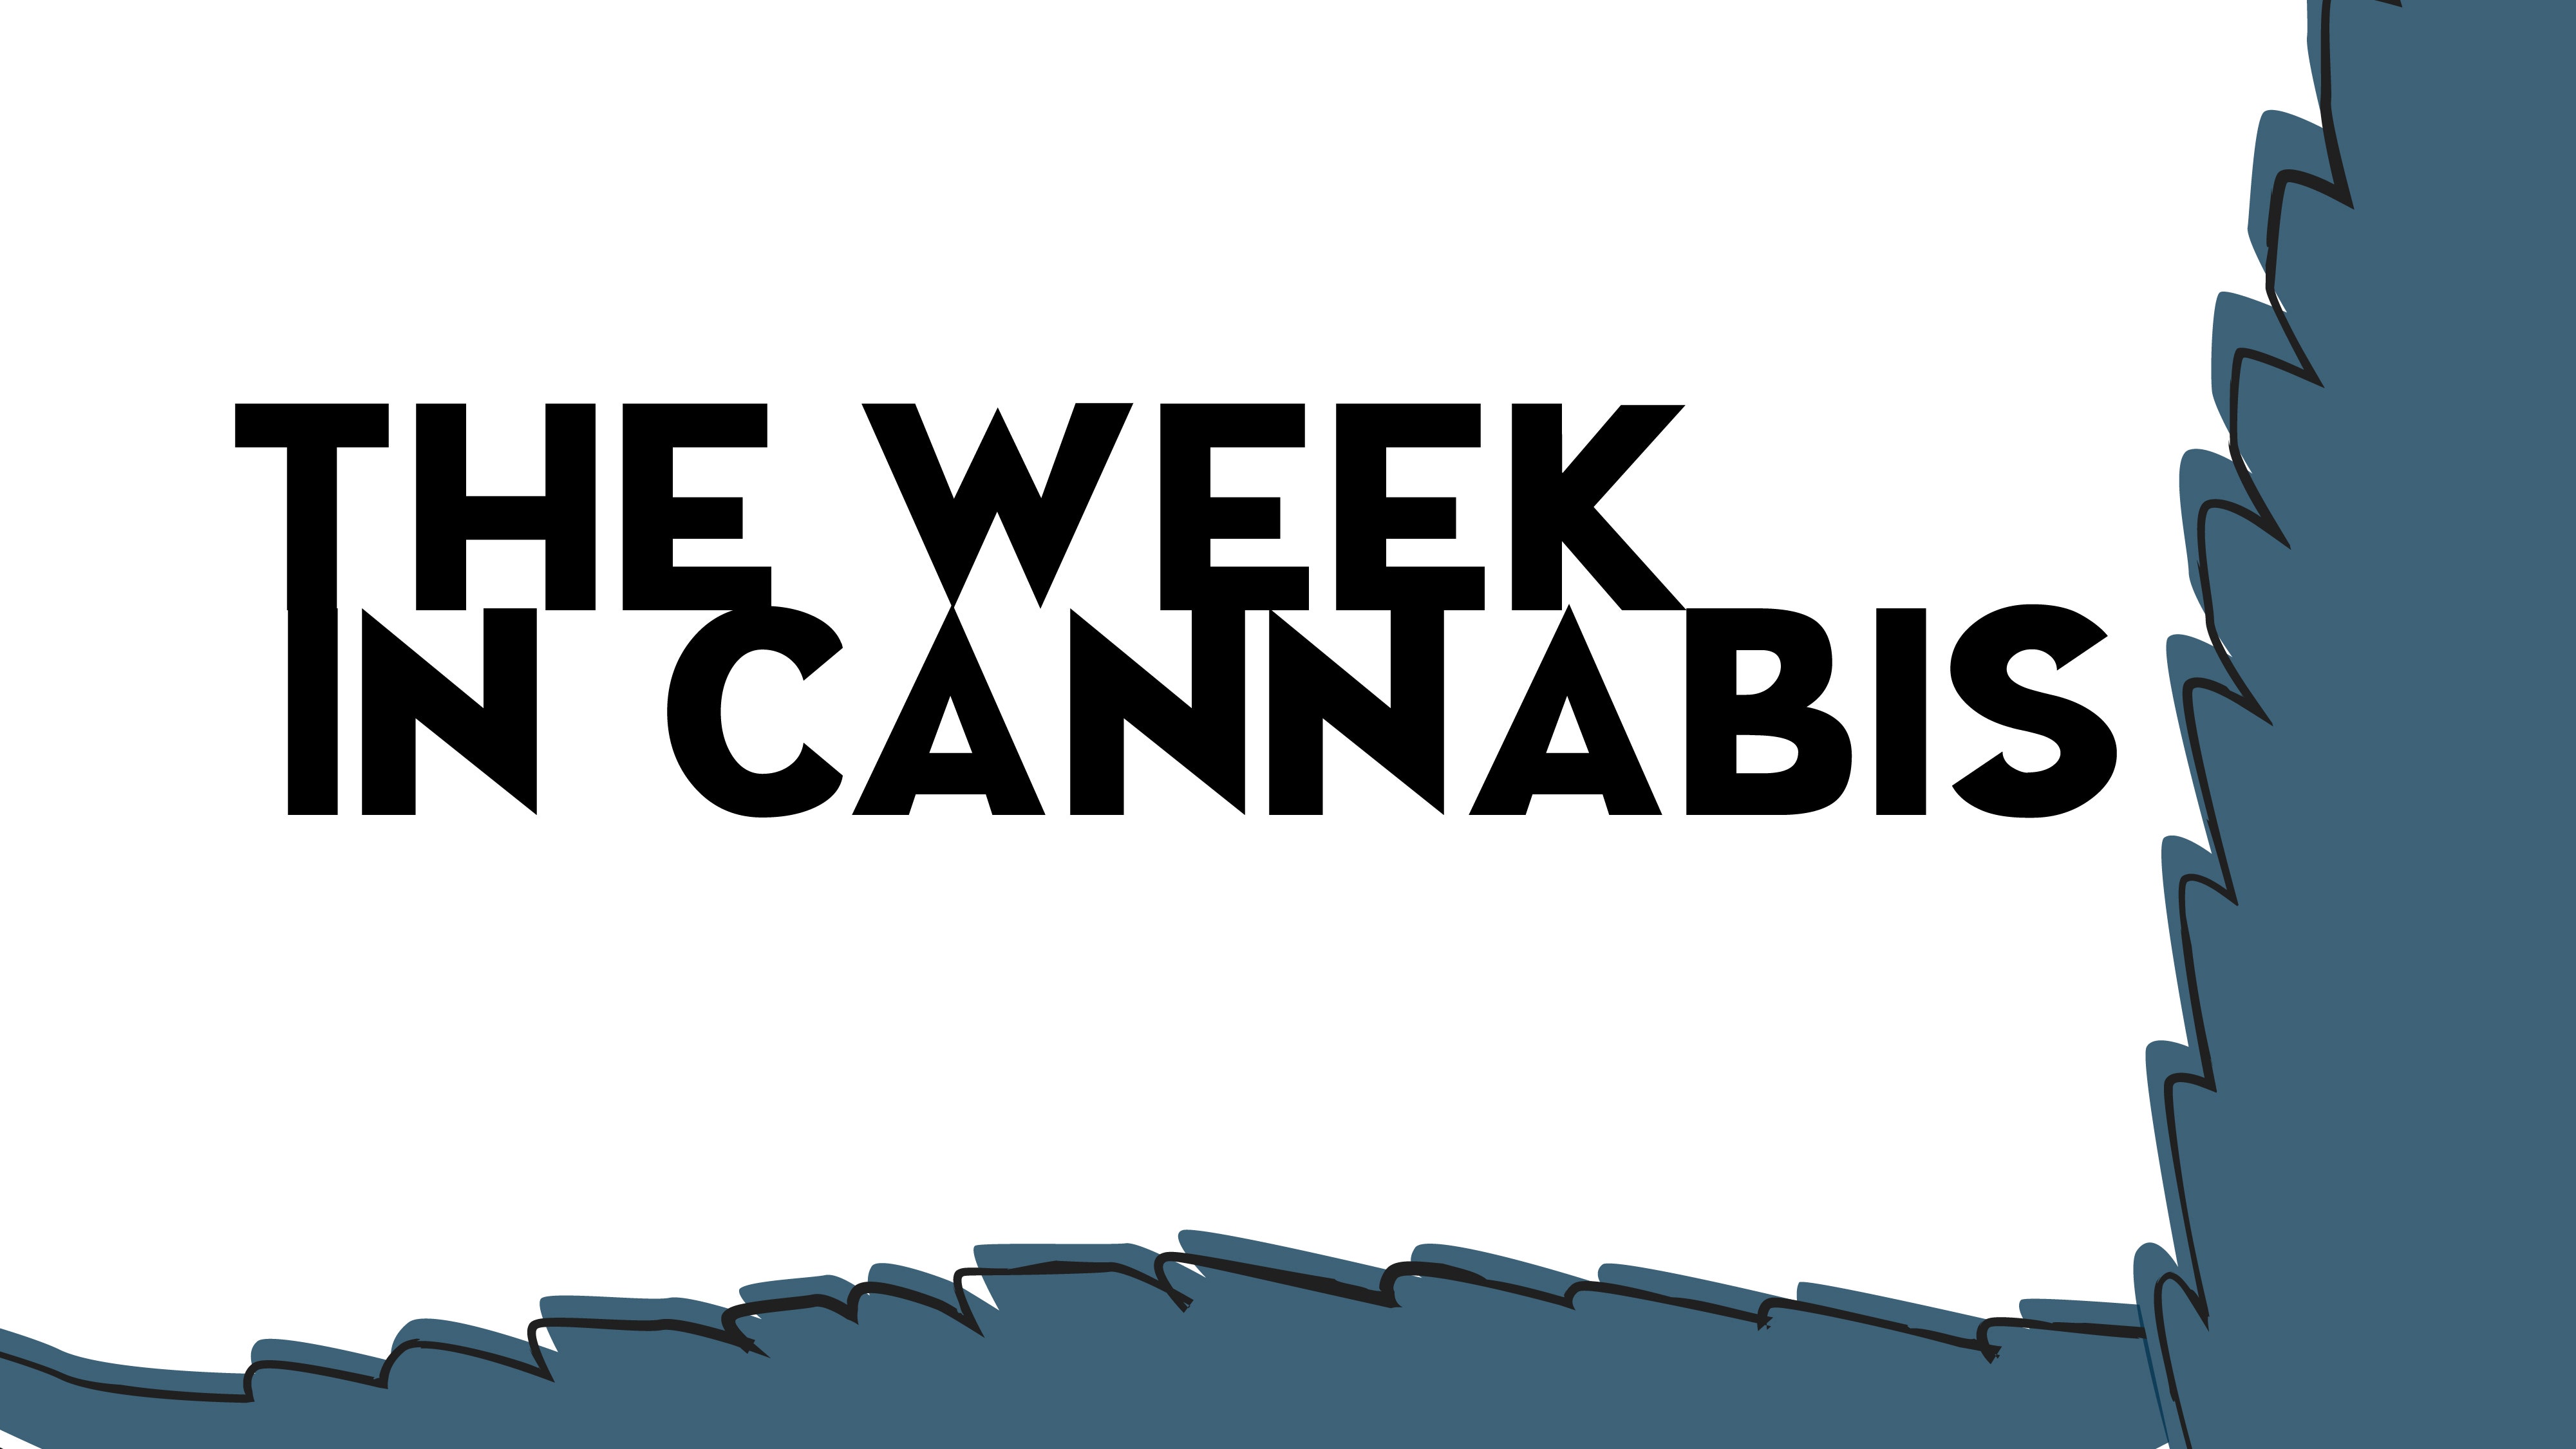 The Week In Cannabis: A Great Week For Stocks Driven By Confusion, Aurora's Rally, New Advisors To Benzinga